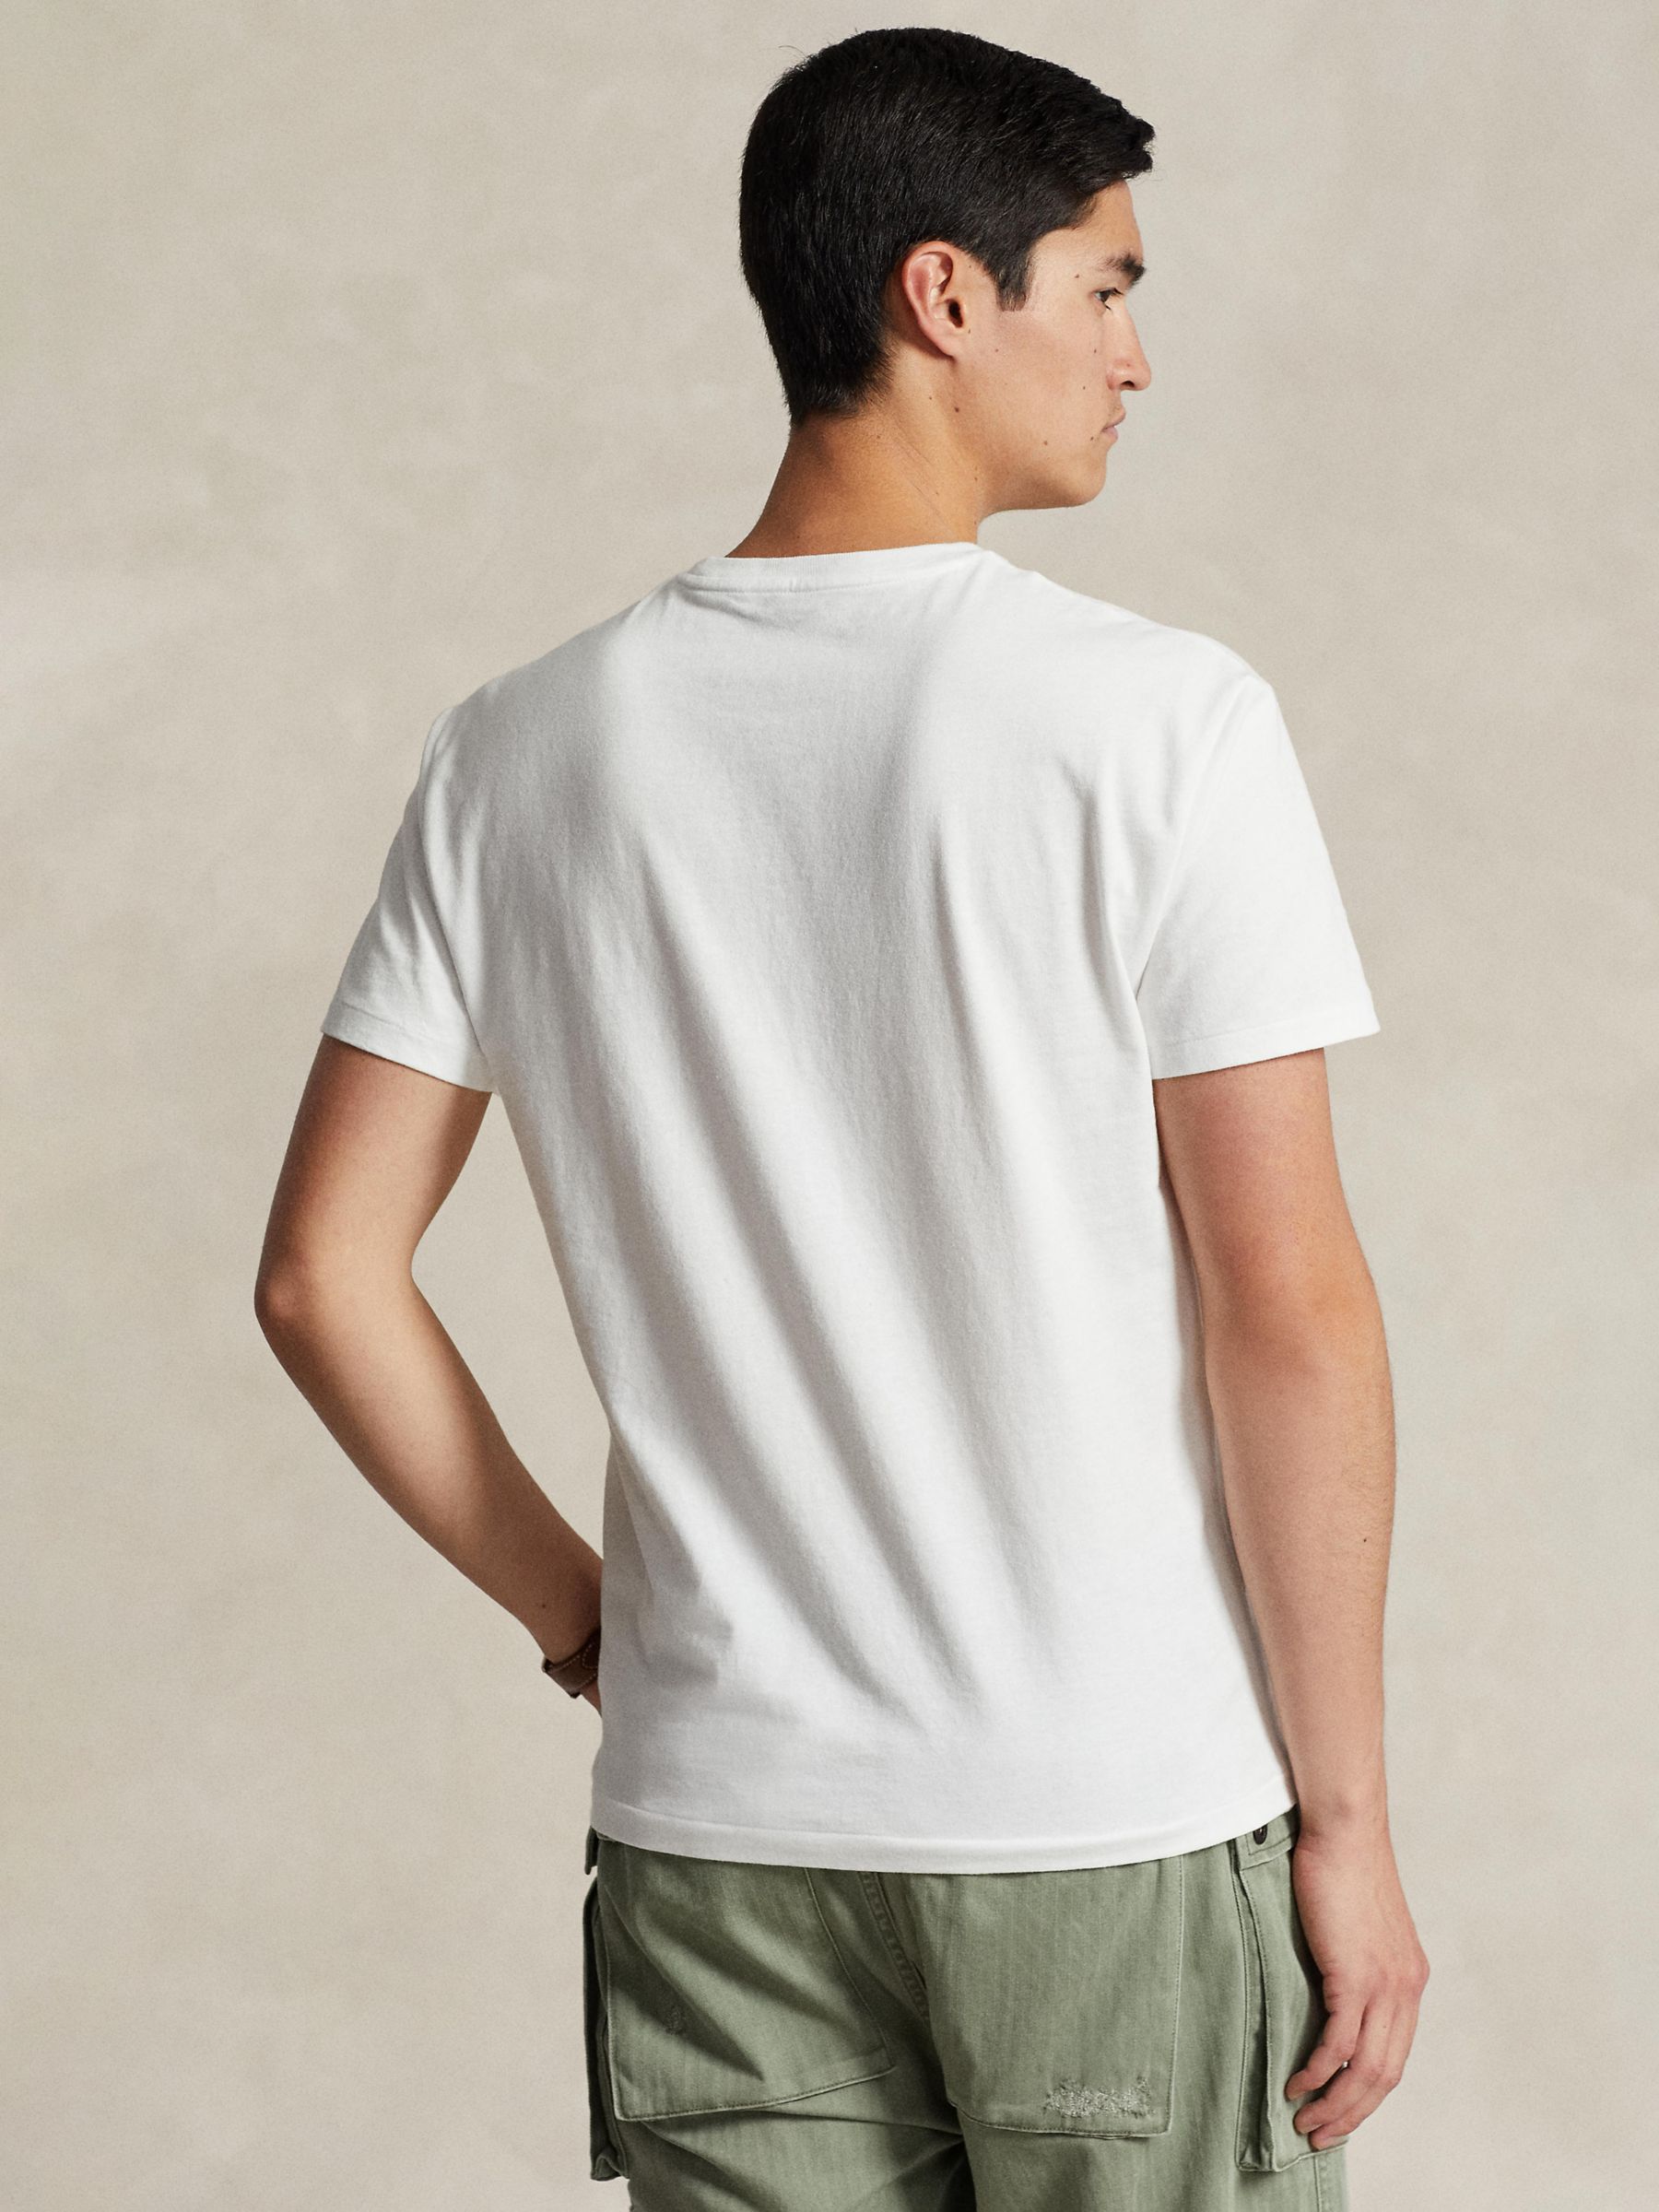 Buy Ralph Lauren Classic Fit Graphic Jersey T-Shirt, Classic Oxford White Online at johnlewis.com